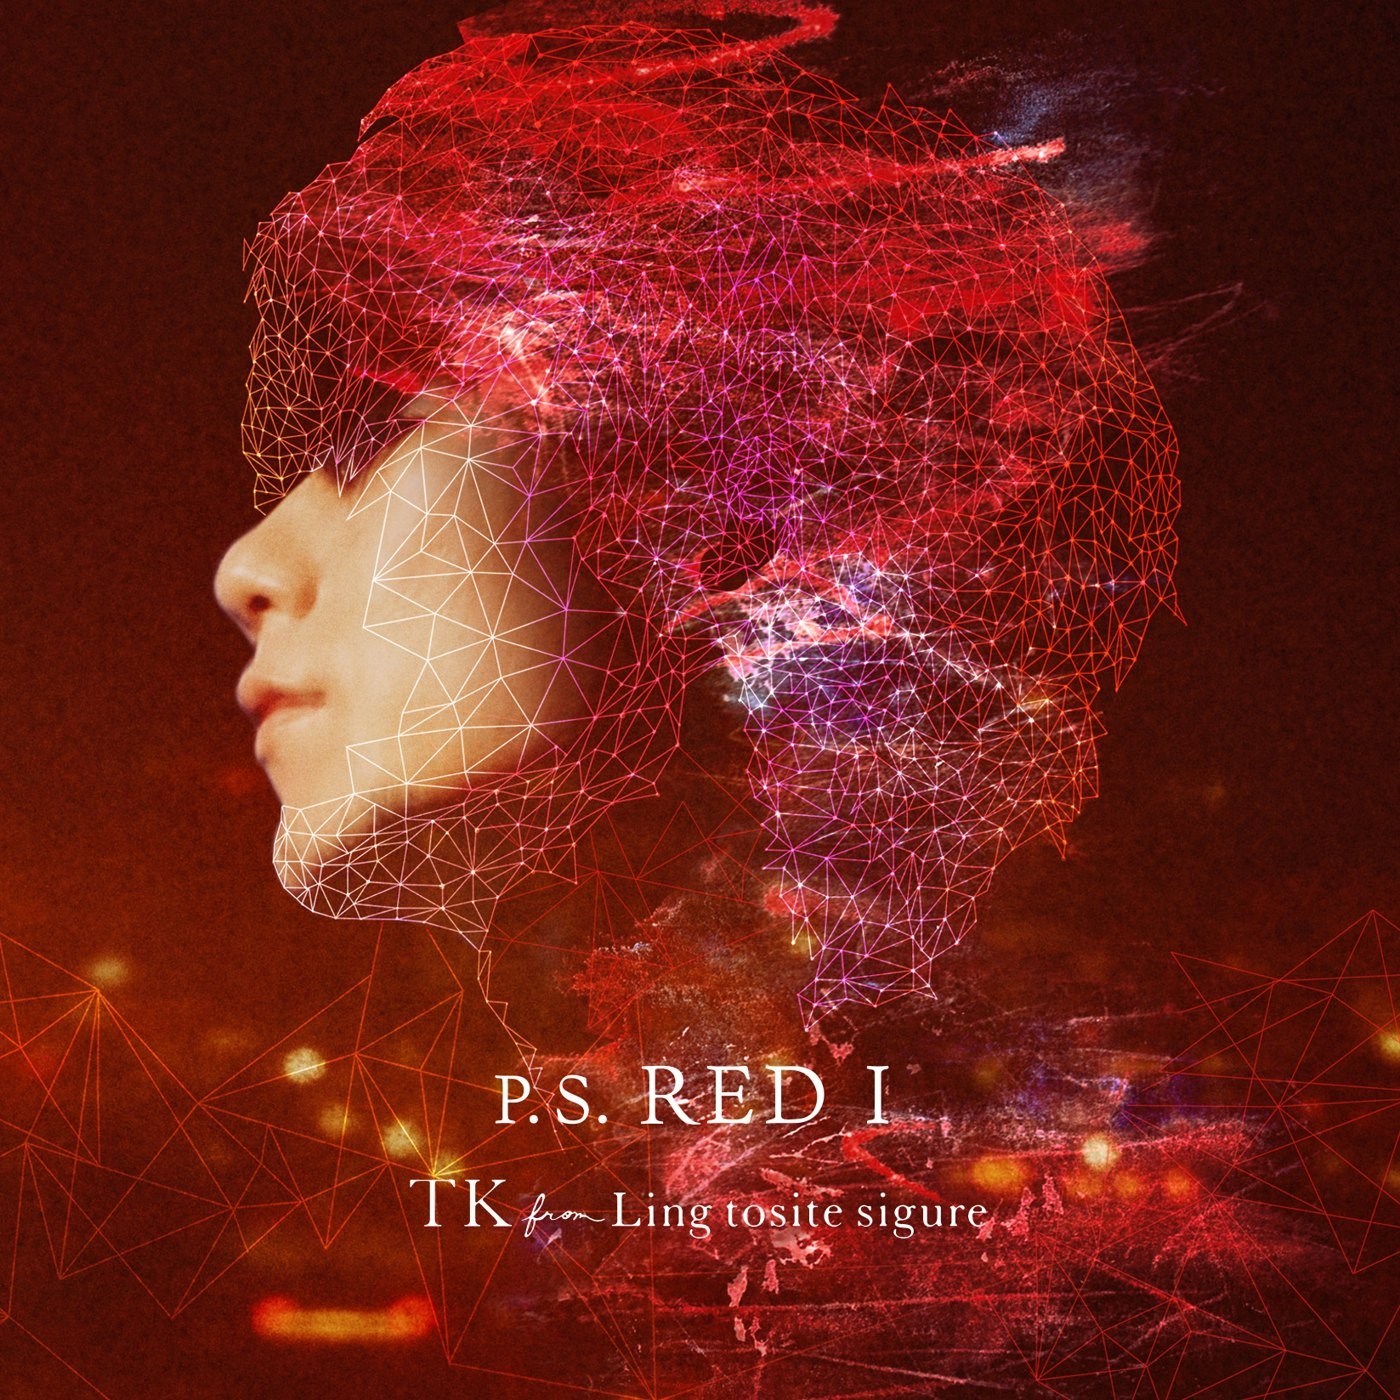 TK from 凛として時雨 – P.S. RED I [FLAC + MP3 + DVD ISO] [2019.03.06]